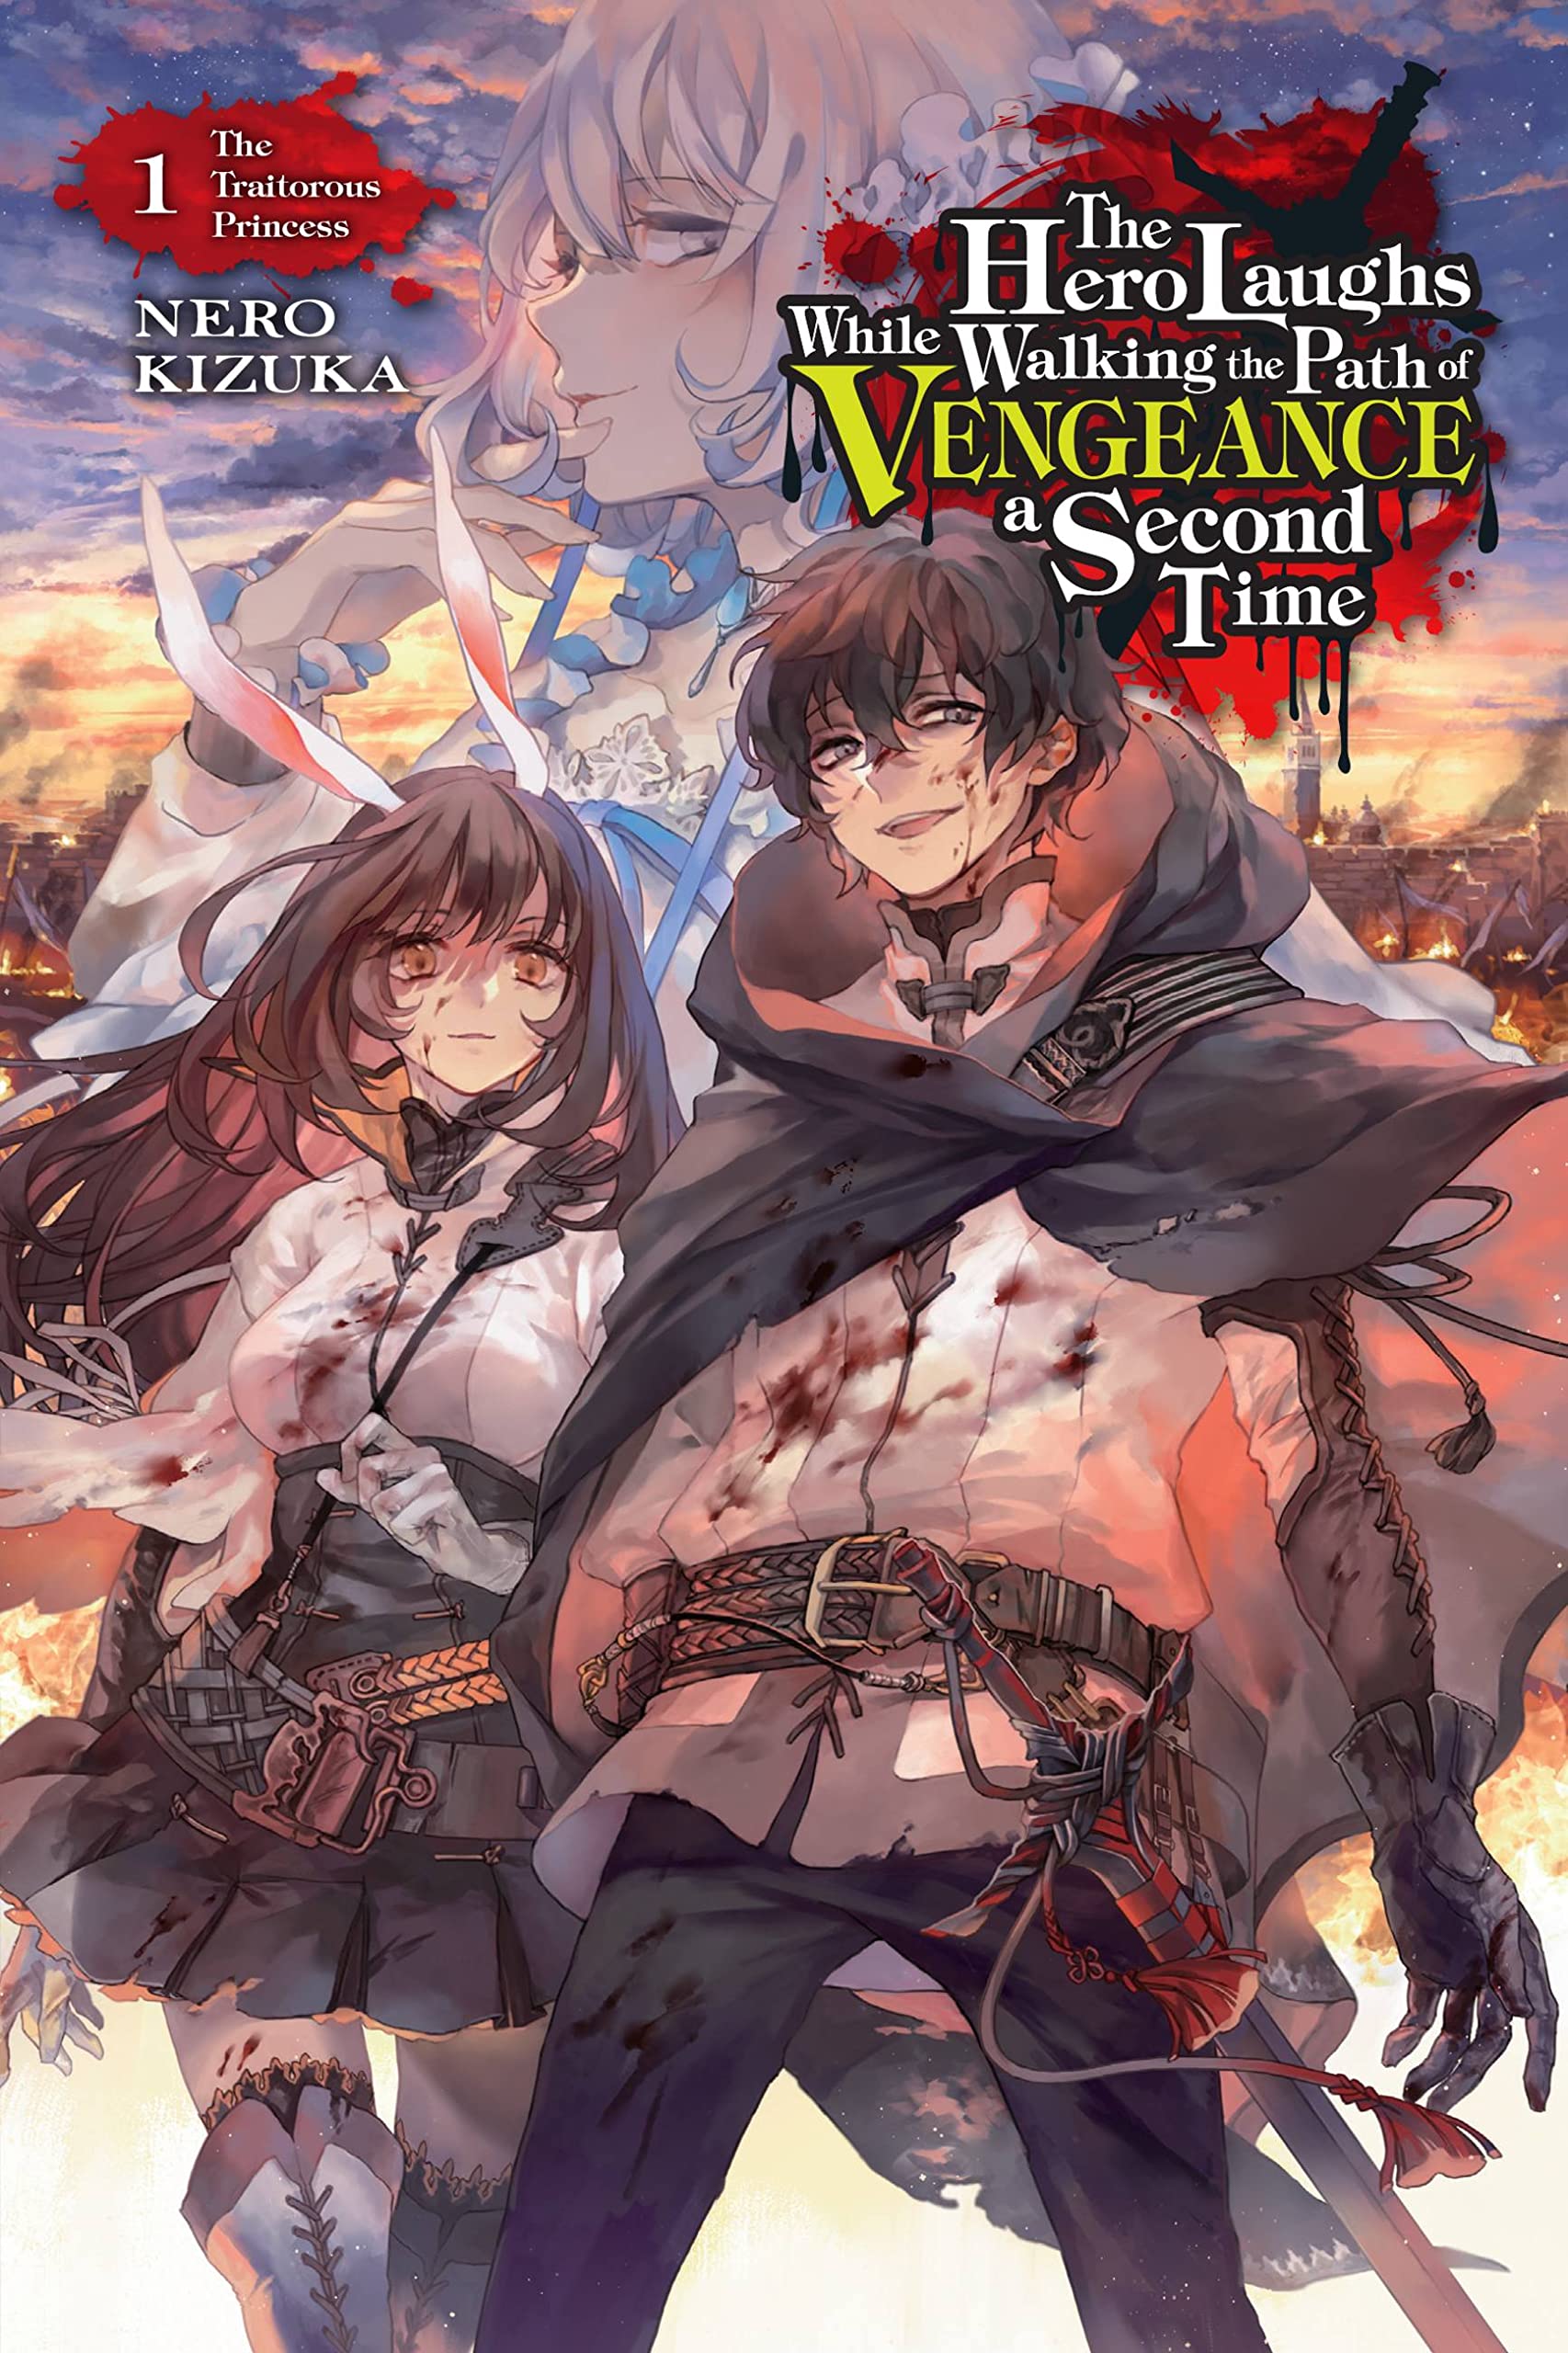 The Hero Laughs While Walking the Path of Vengeance a Second Time Vol. 01 (Light Novel): The Traitorous Princess